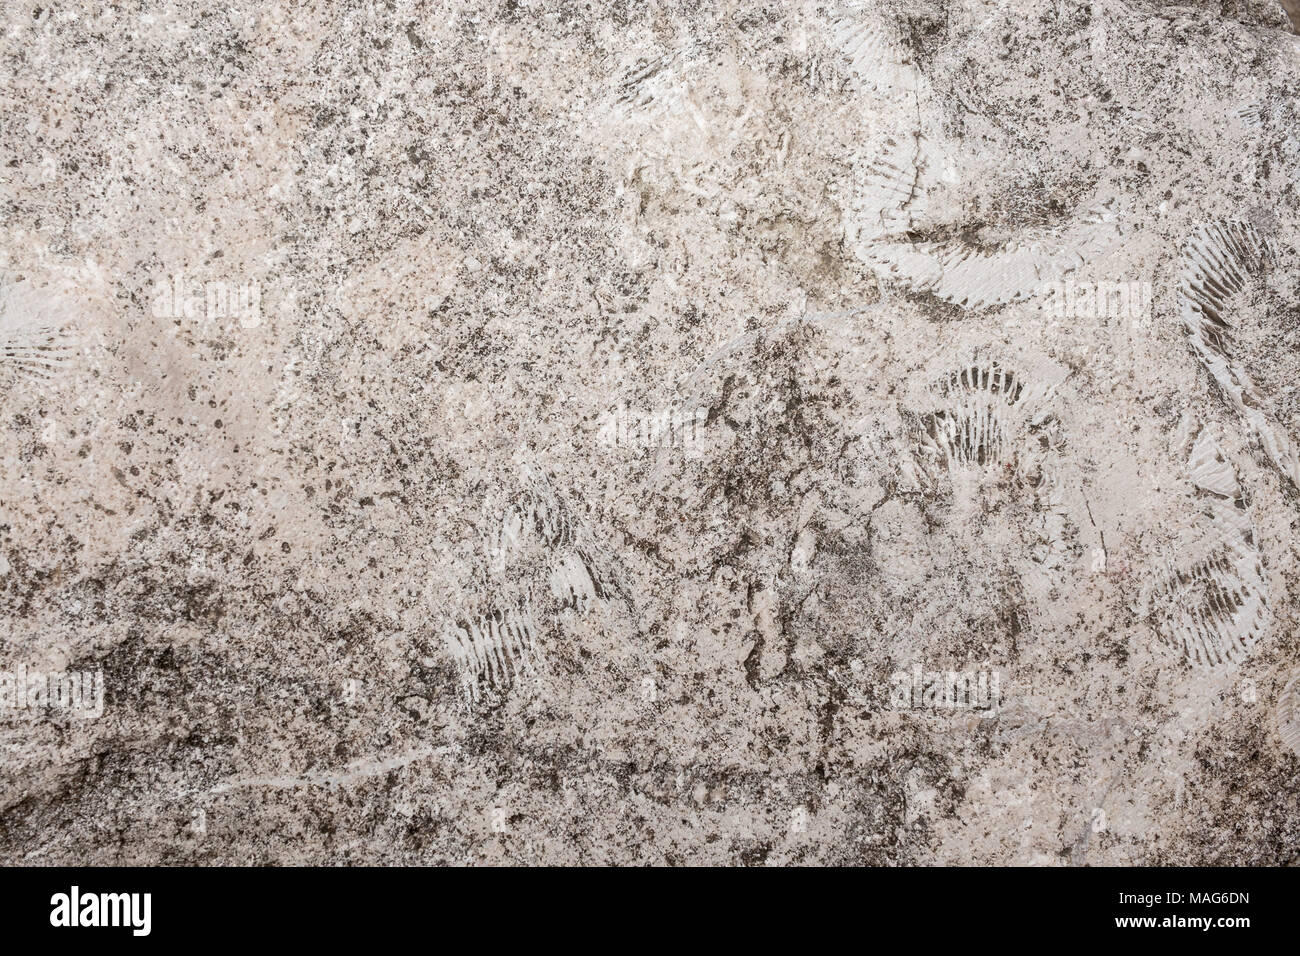 Natural stony background of porous flat rock with relief prints of seashells. Stock Photo